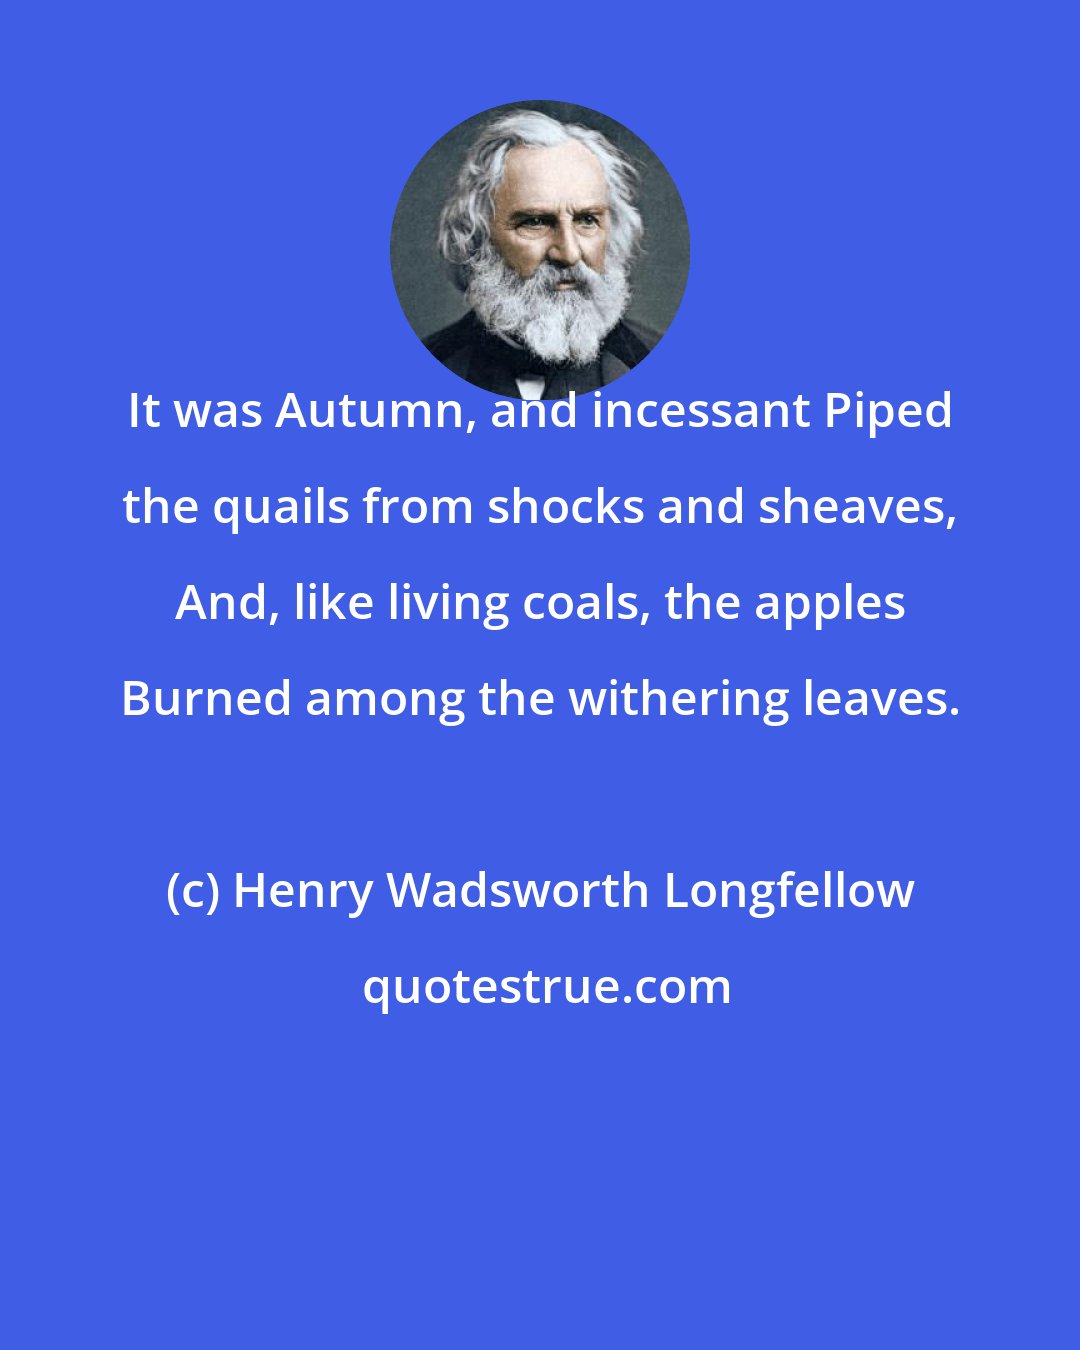 Henry Wadsworth Longfellow: It was Autumn, and incessant Piped the quails from shocks and sheaves, And, like living coals, the apples Burned among the withering leaves.